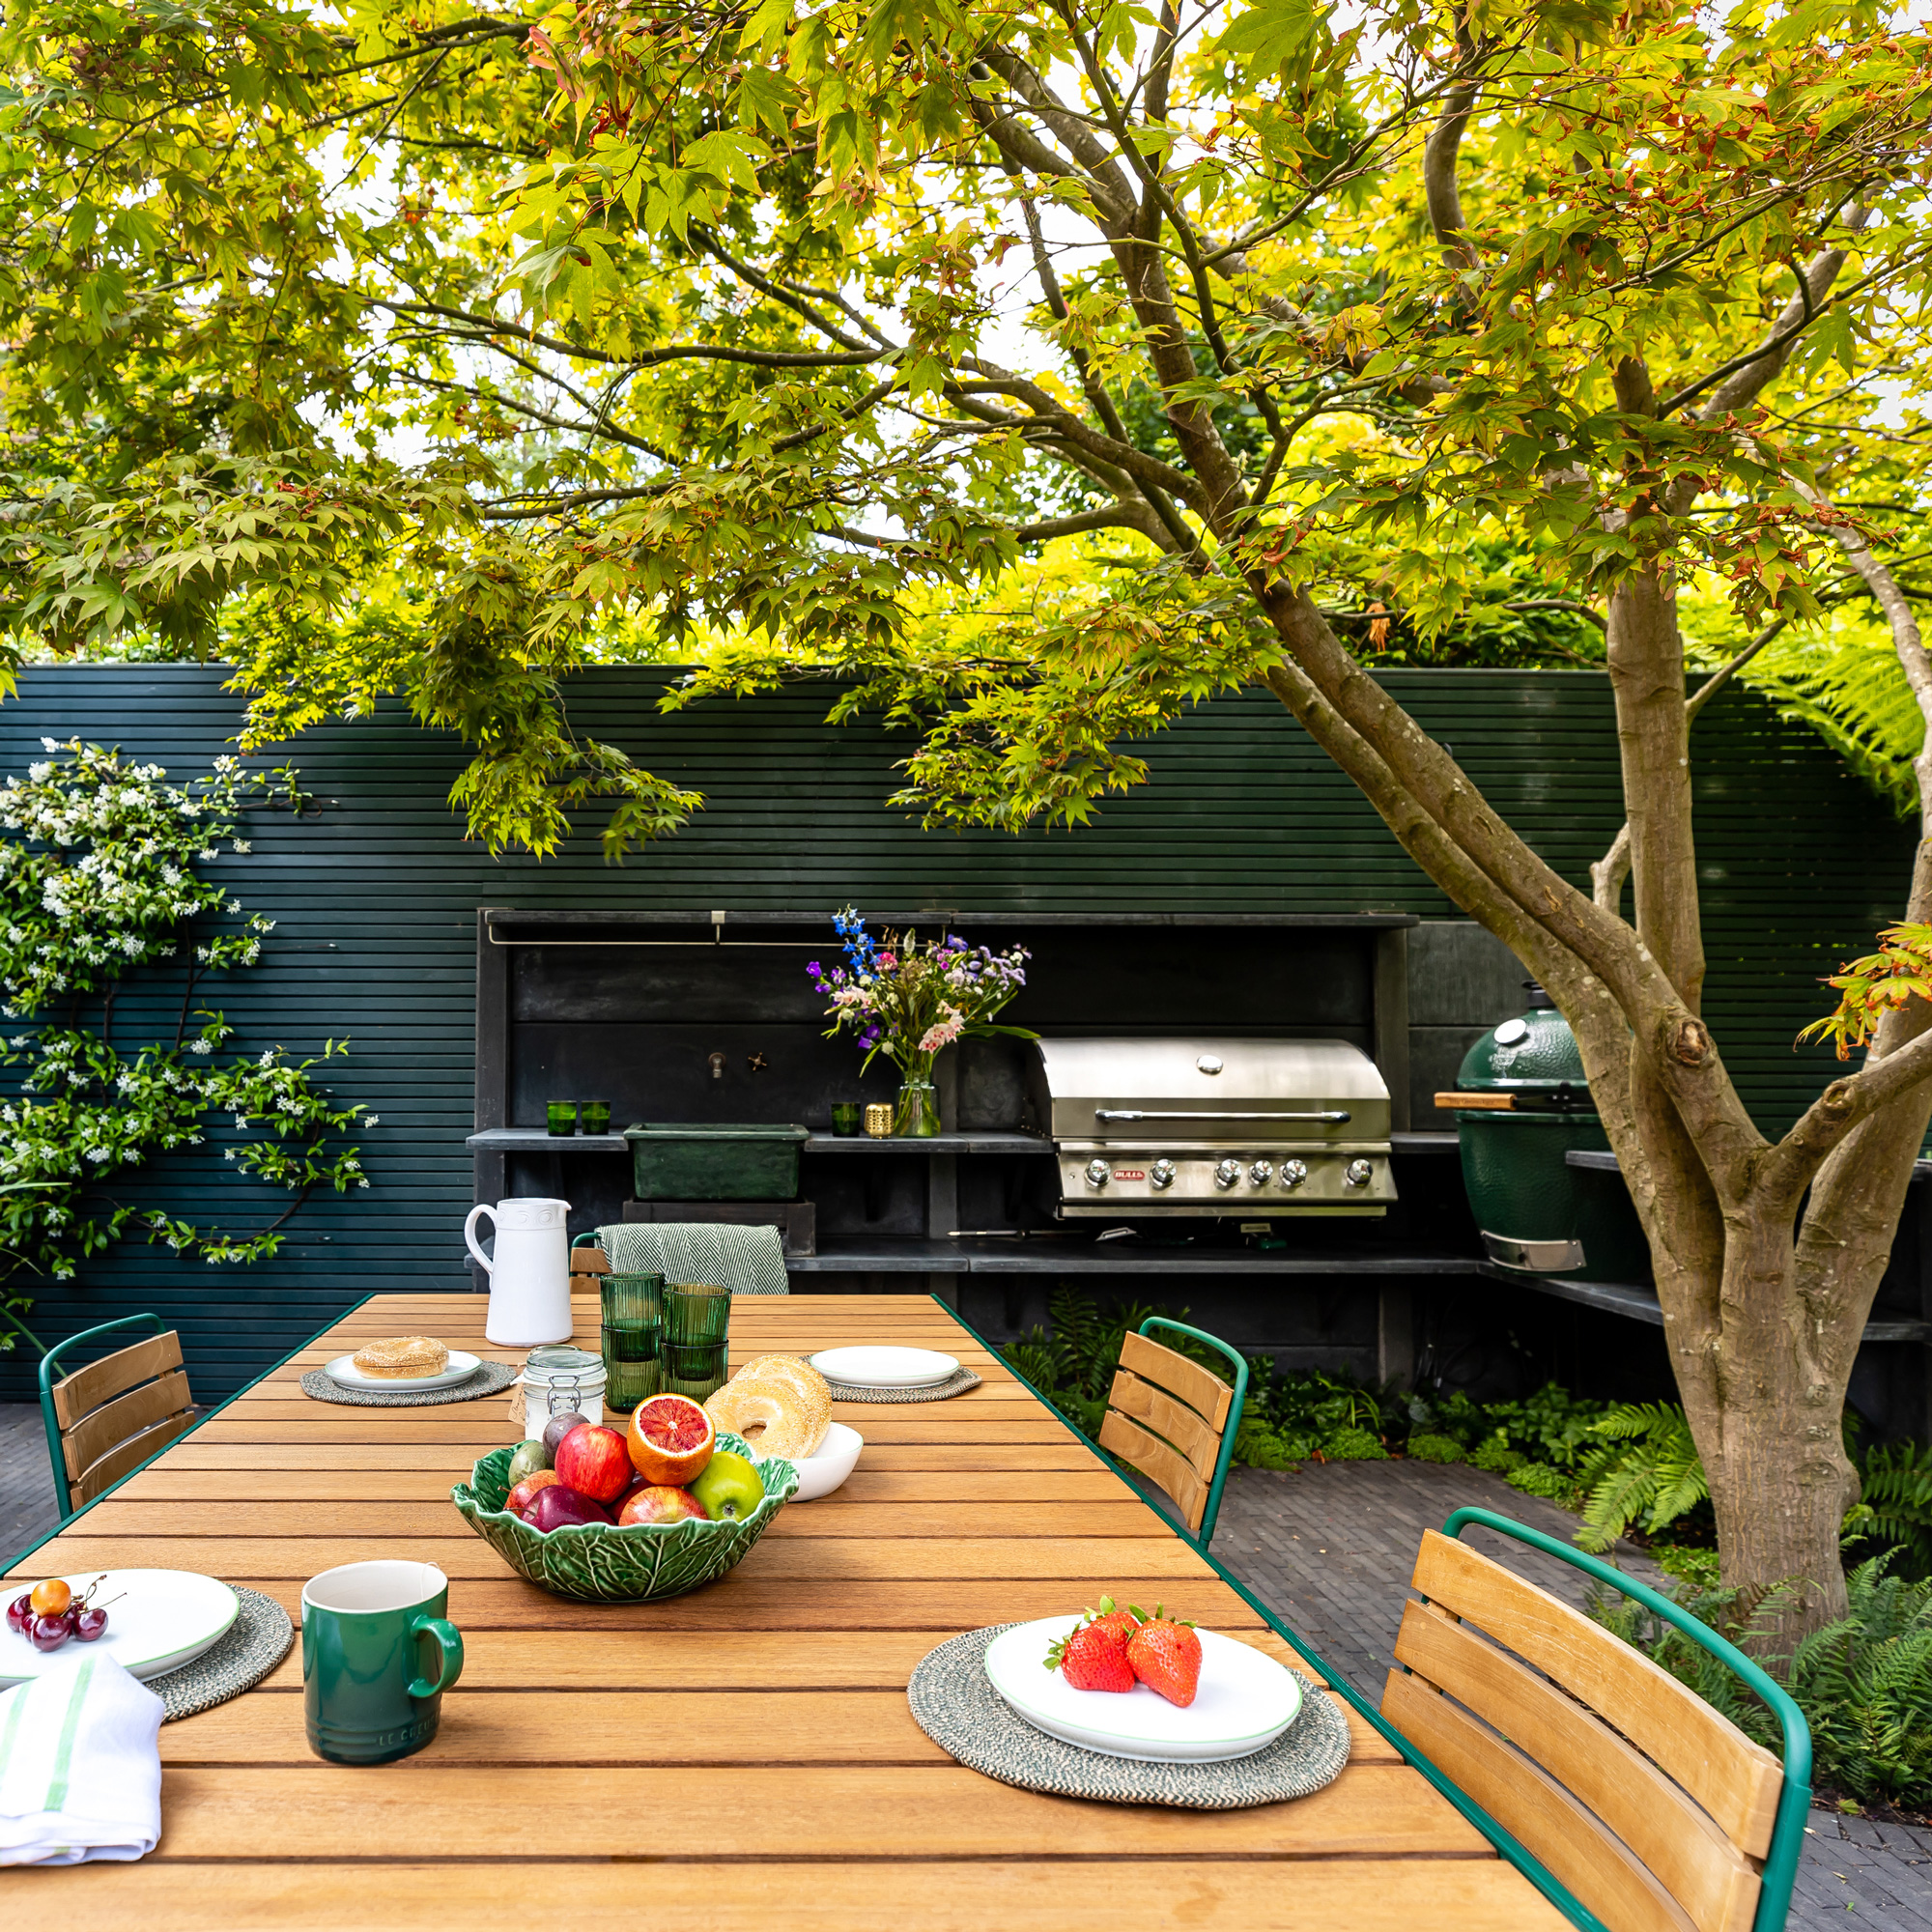 garden makeover with a dining table and chairs, outdoor kitchen with two barbecues and a kitchen sink